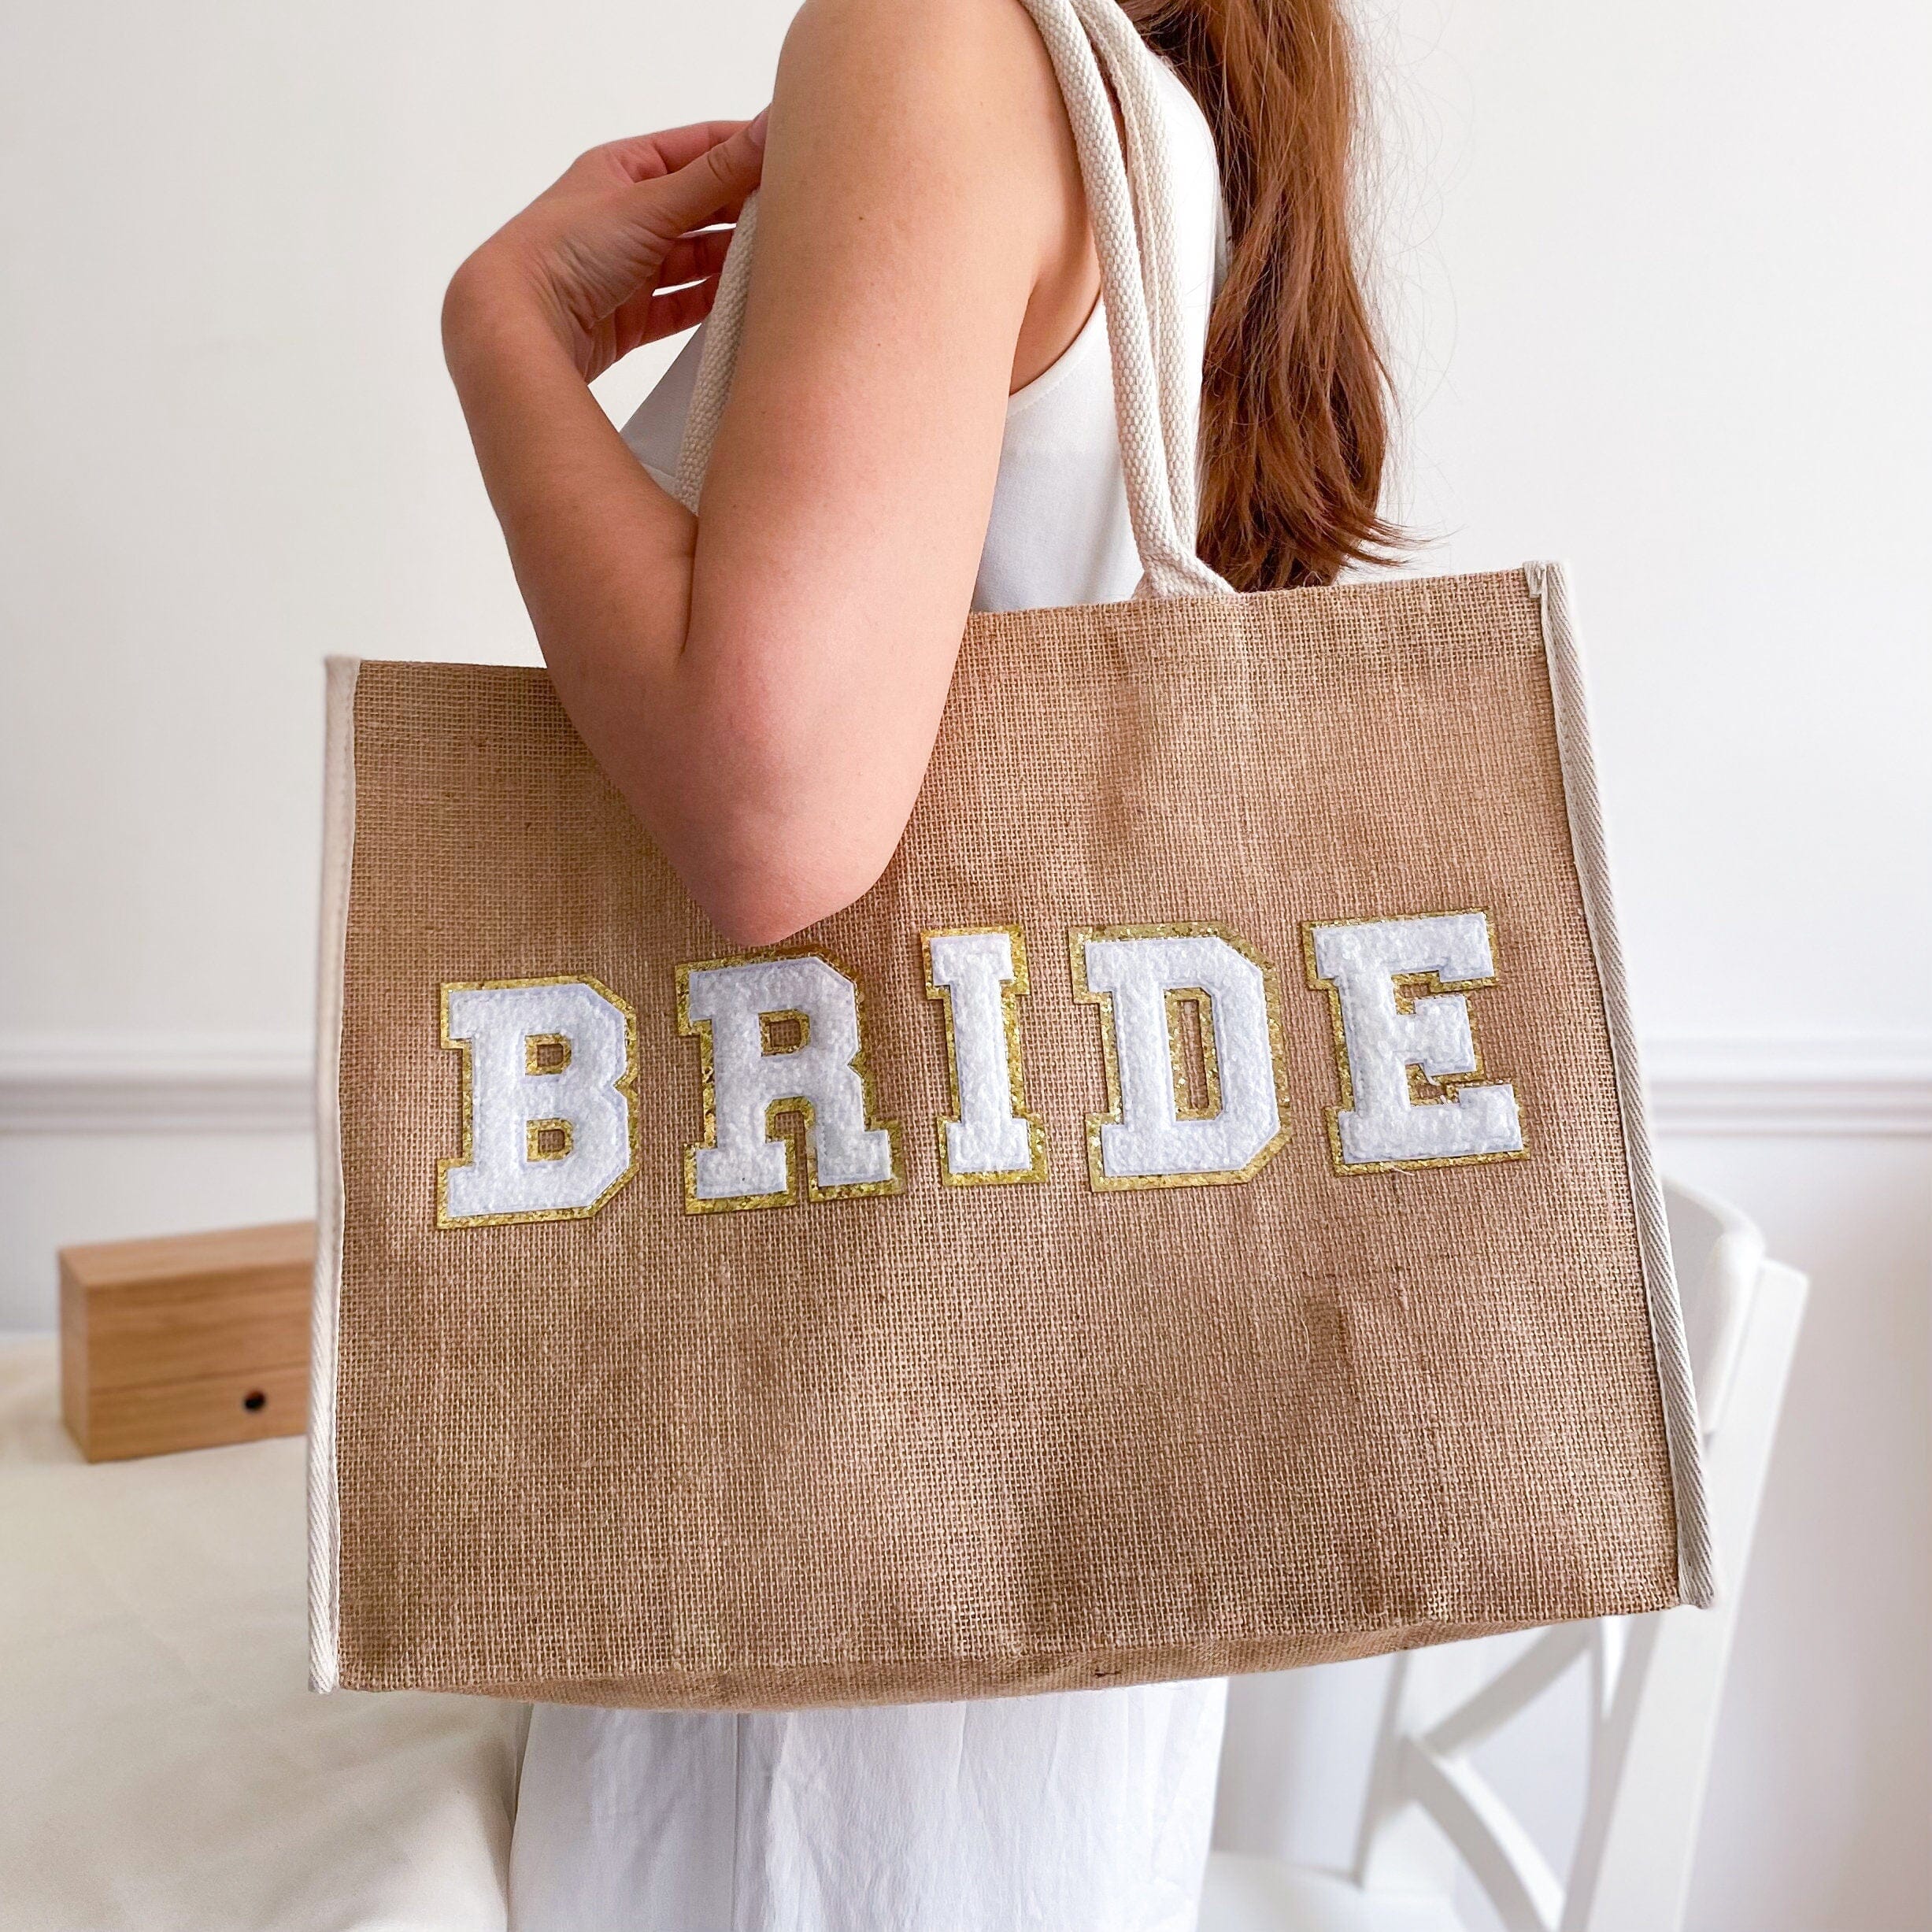 Bride Tote Bag With Gold Trim White Letters, Bridal Shower Engagement Gift, Bride To Be Mrs Wedding